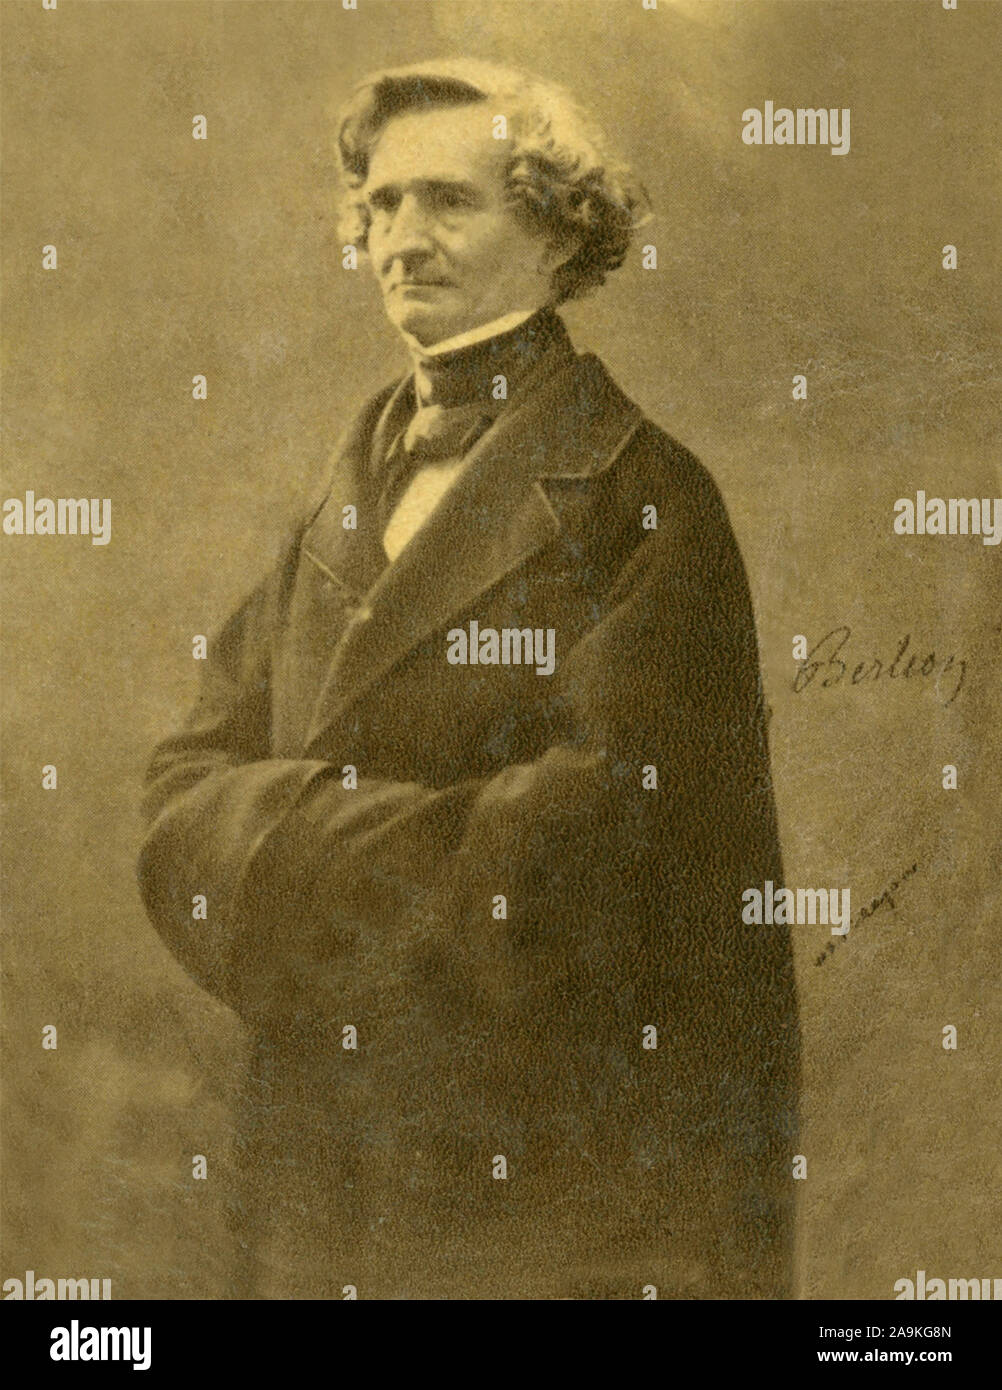 Portrait of the French composer Hector Berlioz Stock Photo